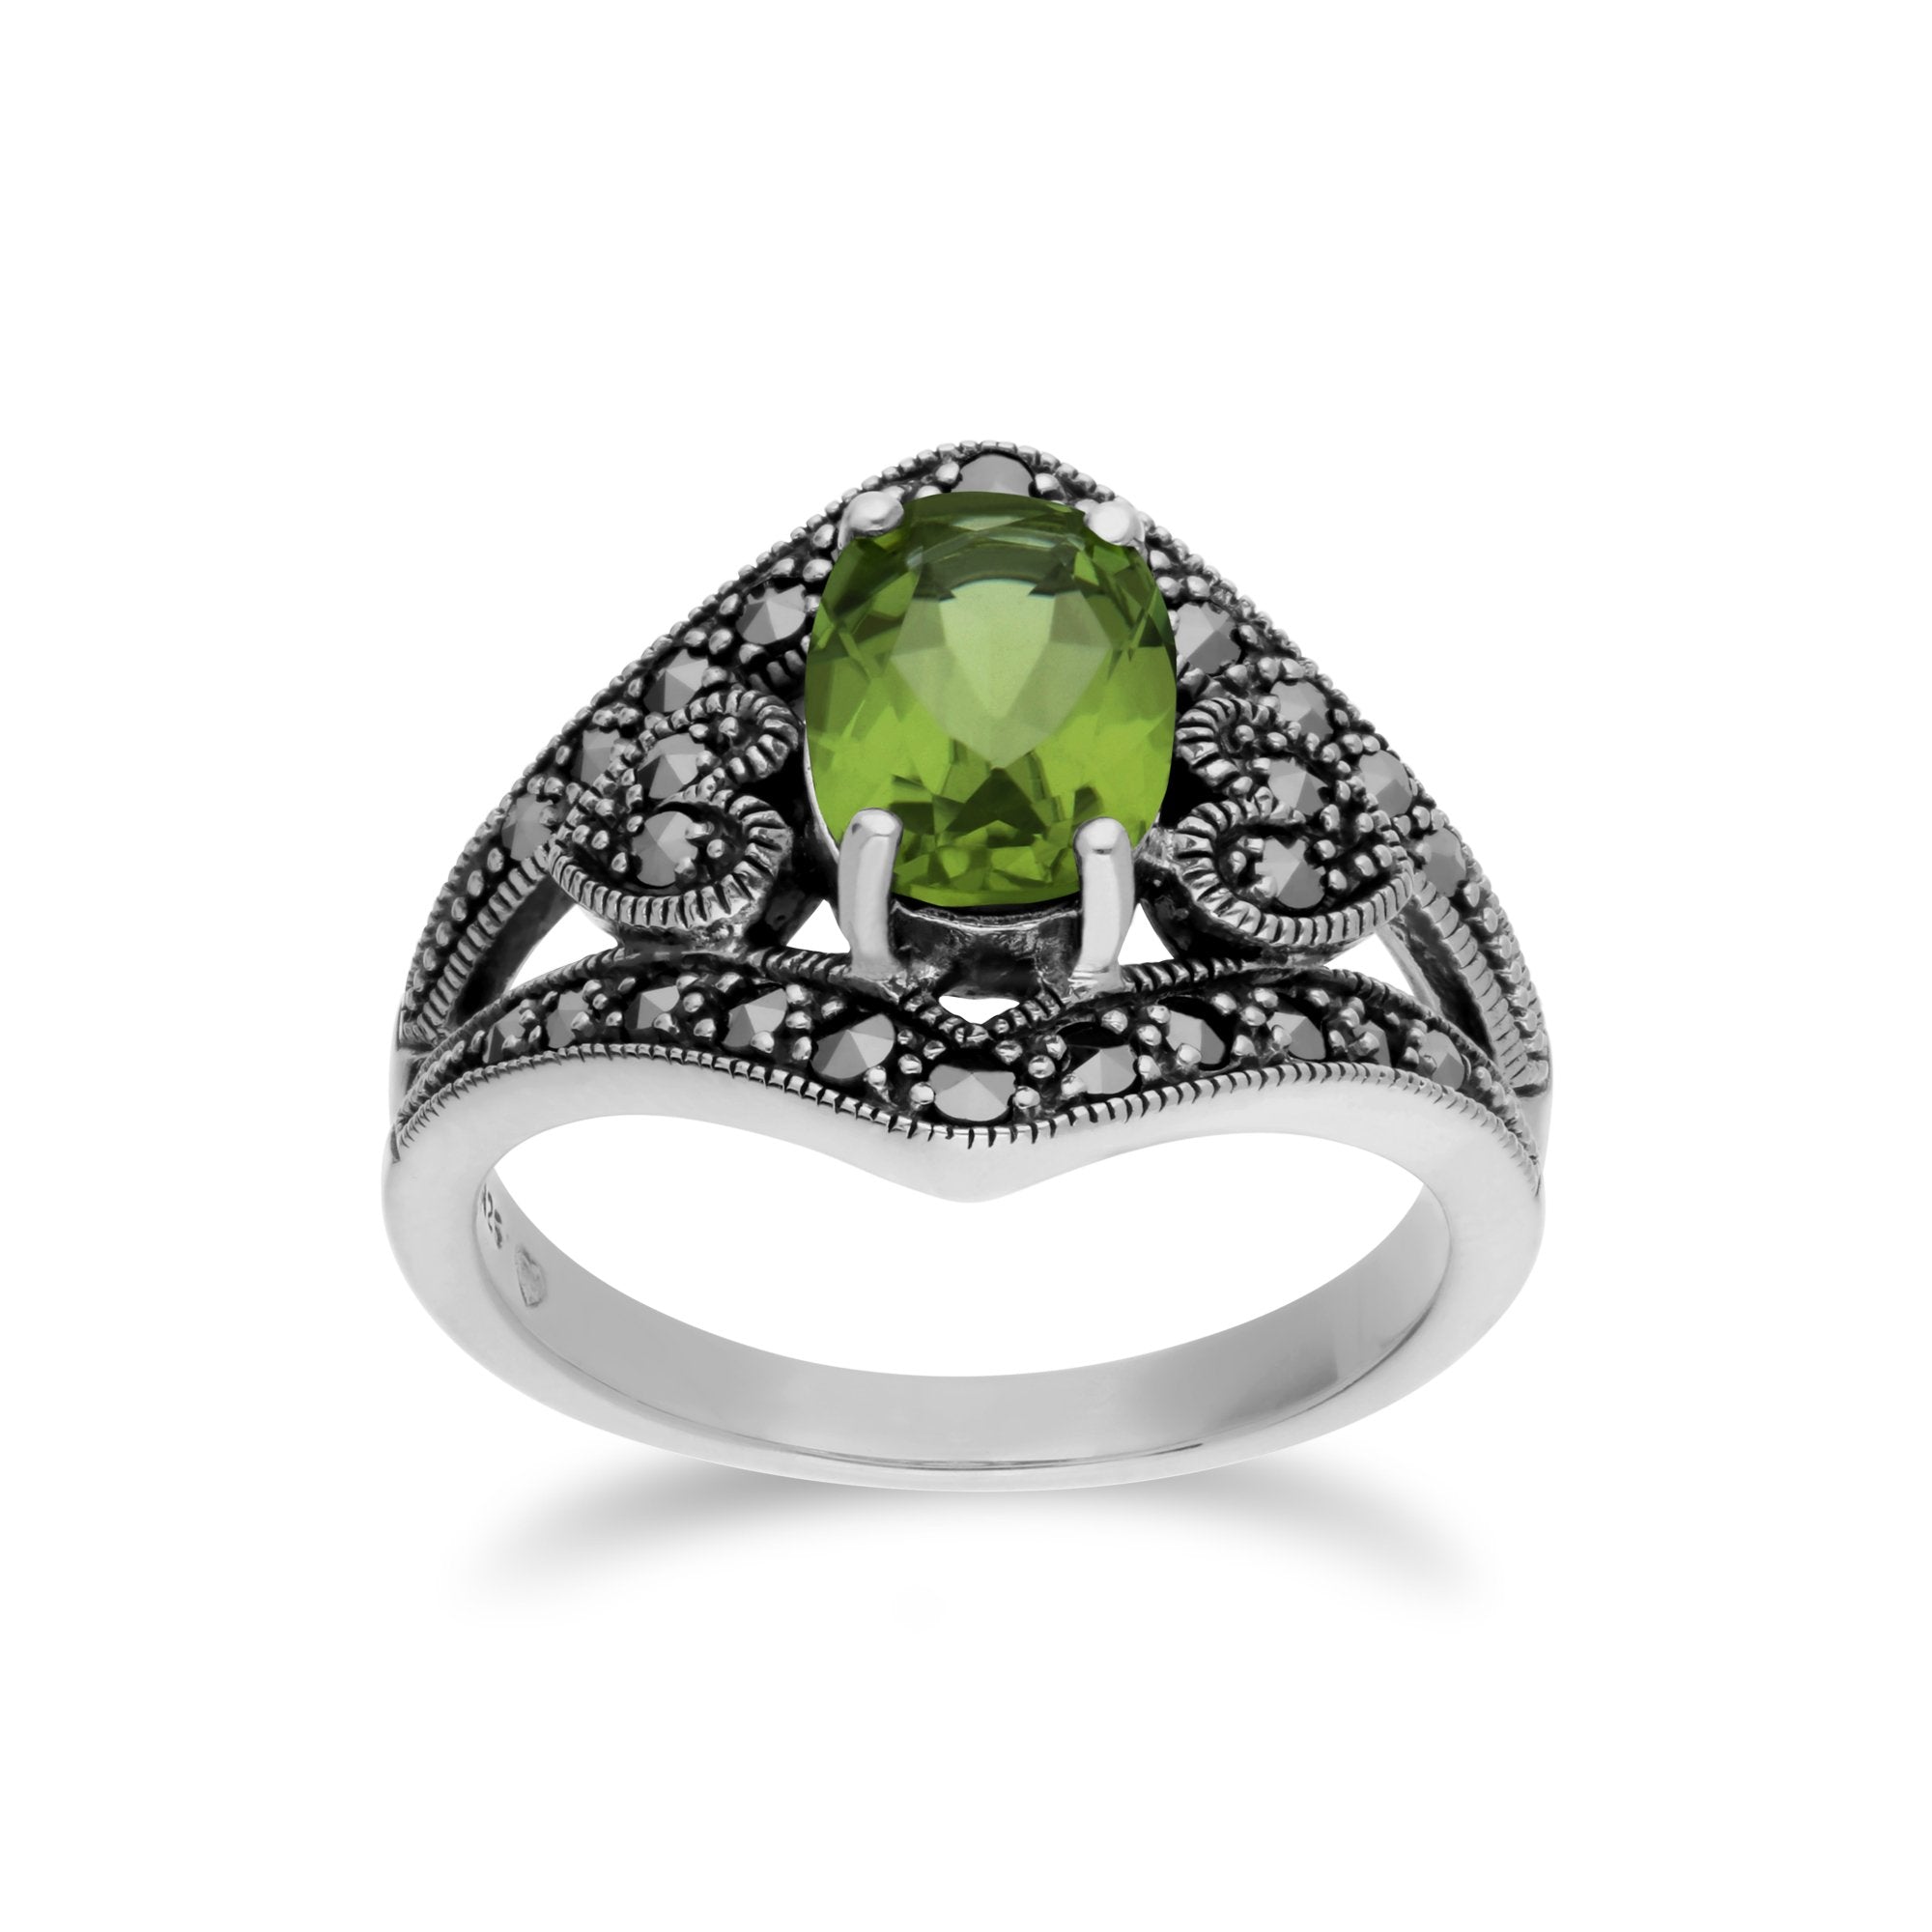 Art Deco Style Oval Peridot & Marcasite in 925 Sterling Silver